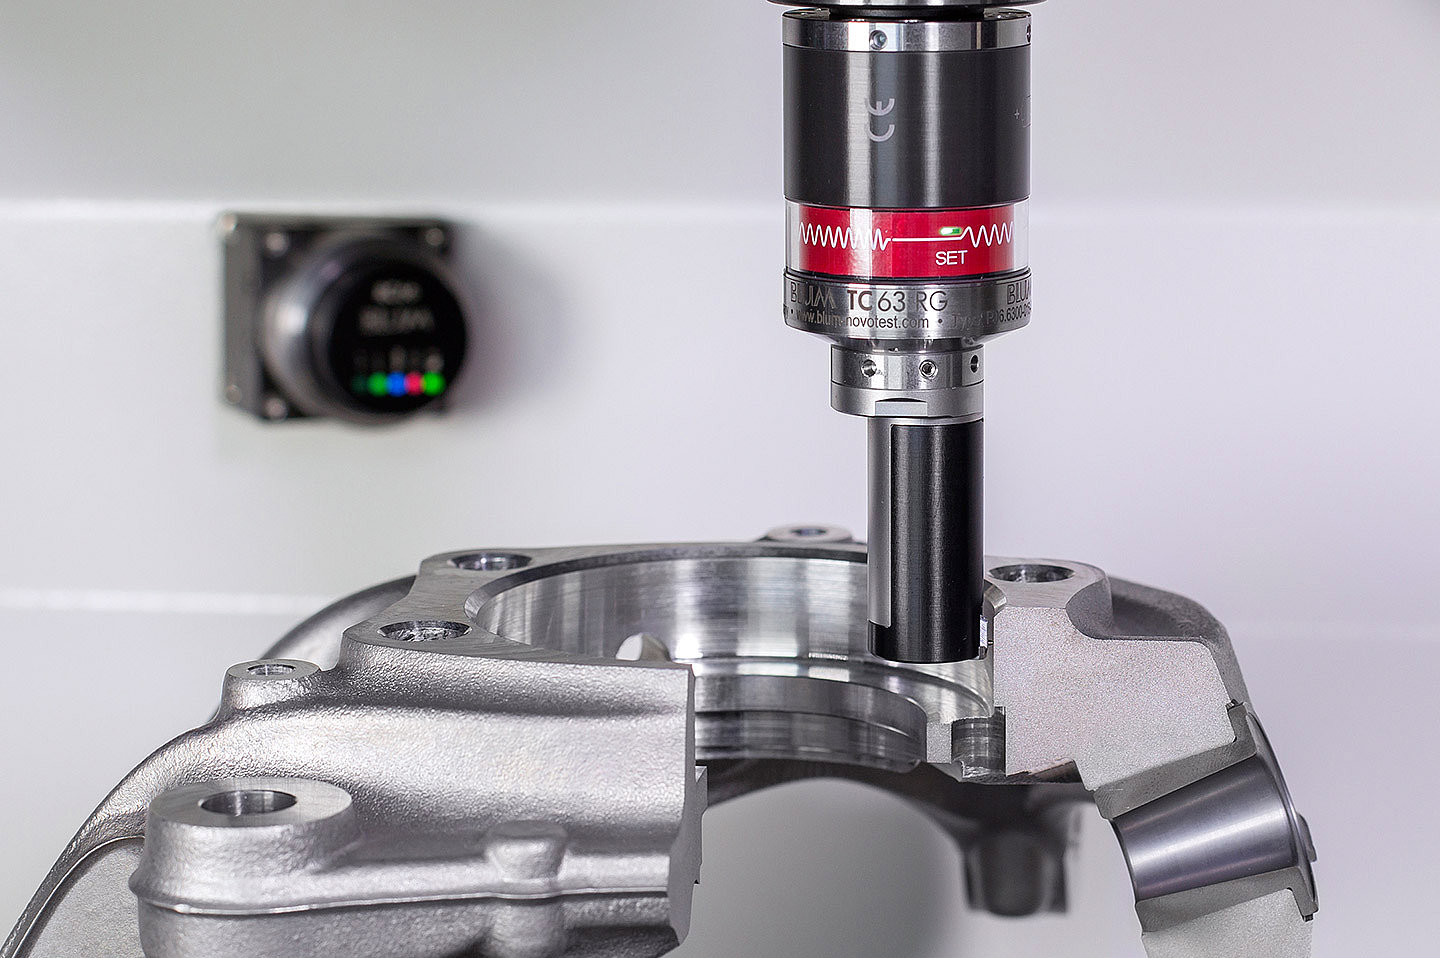 Roughness measurement in the machining centre with BLUM TC63-RG Single